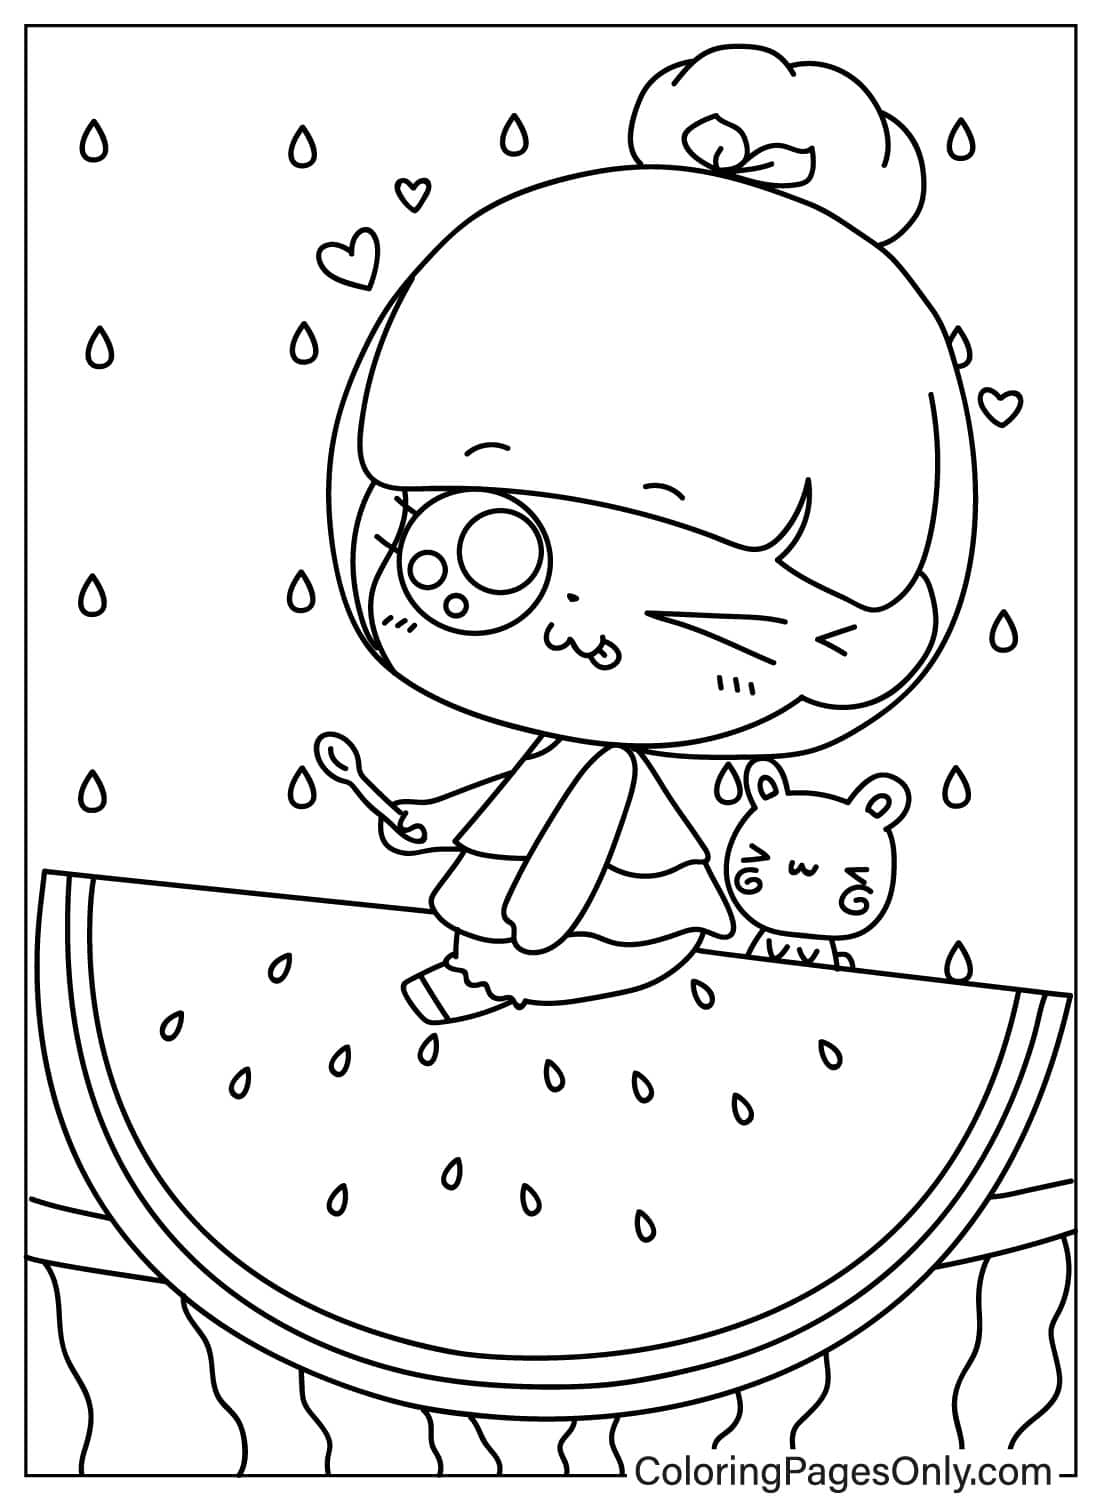 Cute Baby Girl and Giant Watermelon Slice - Free Printable Coloring Pages